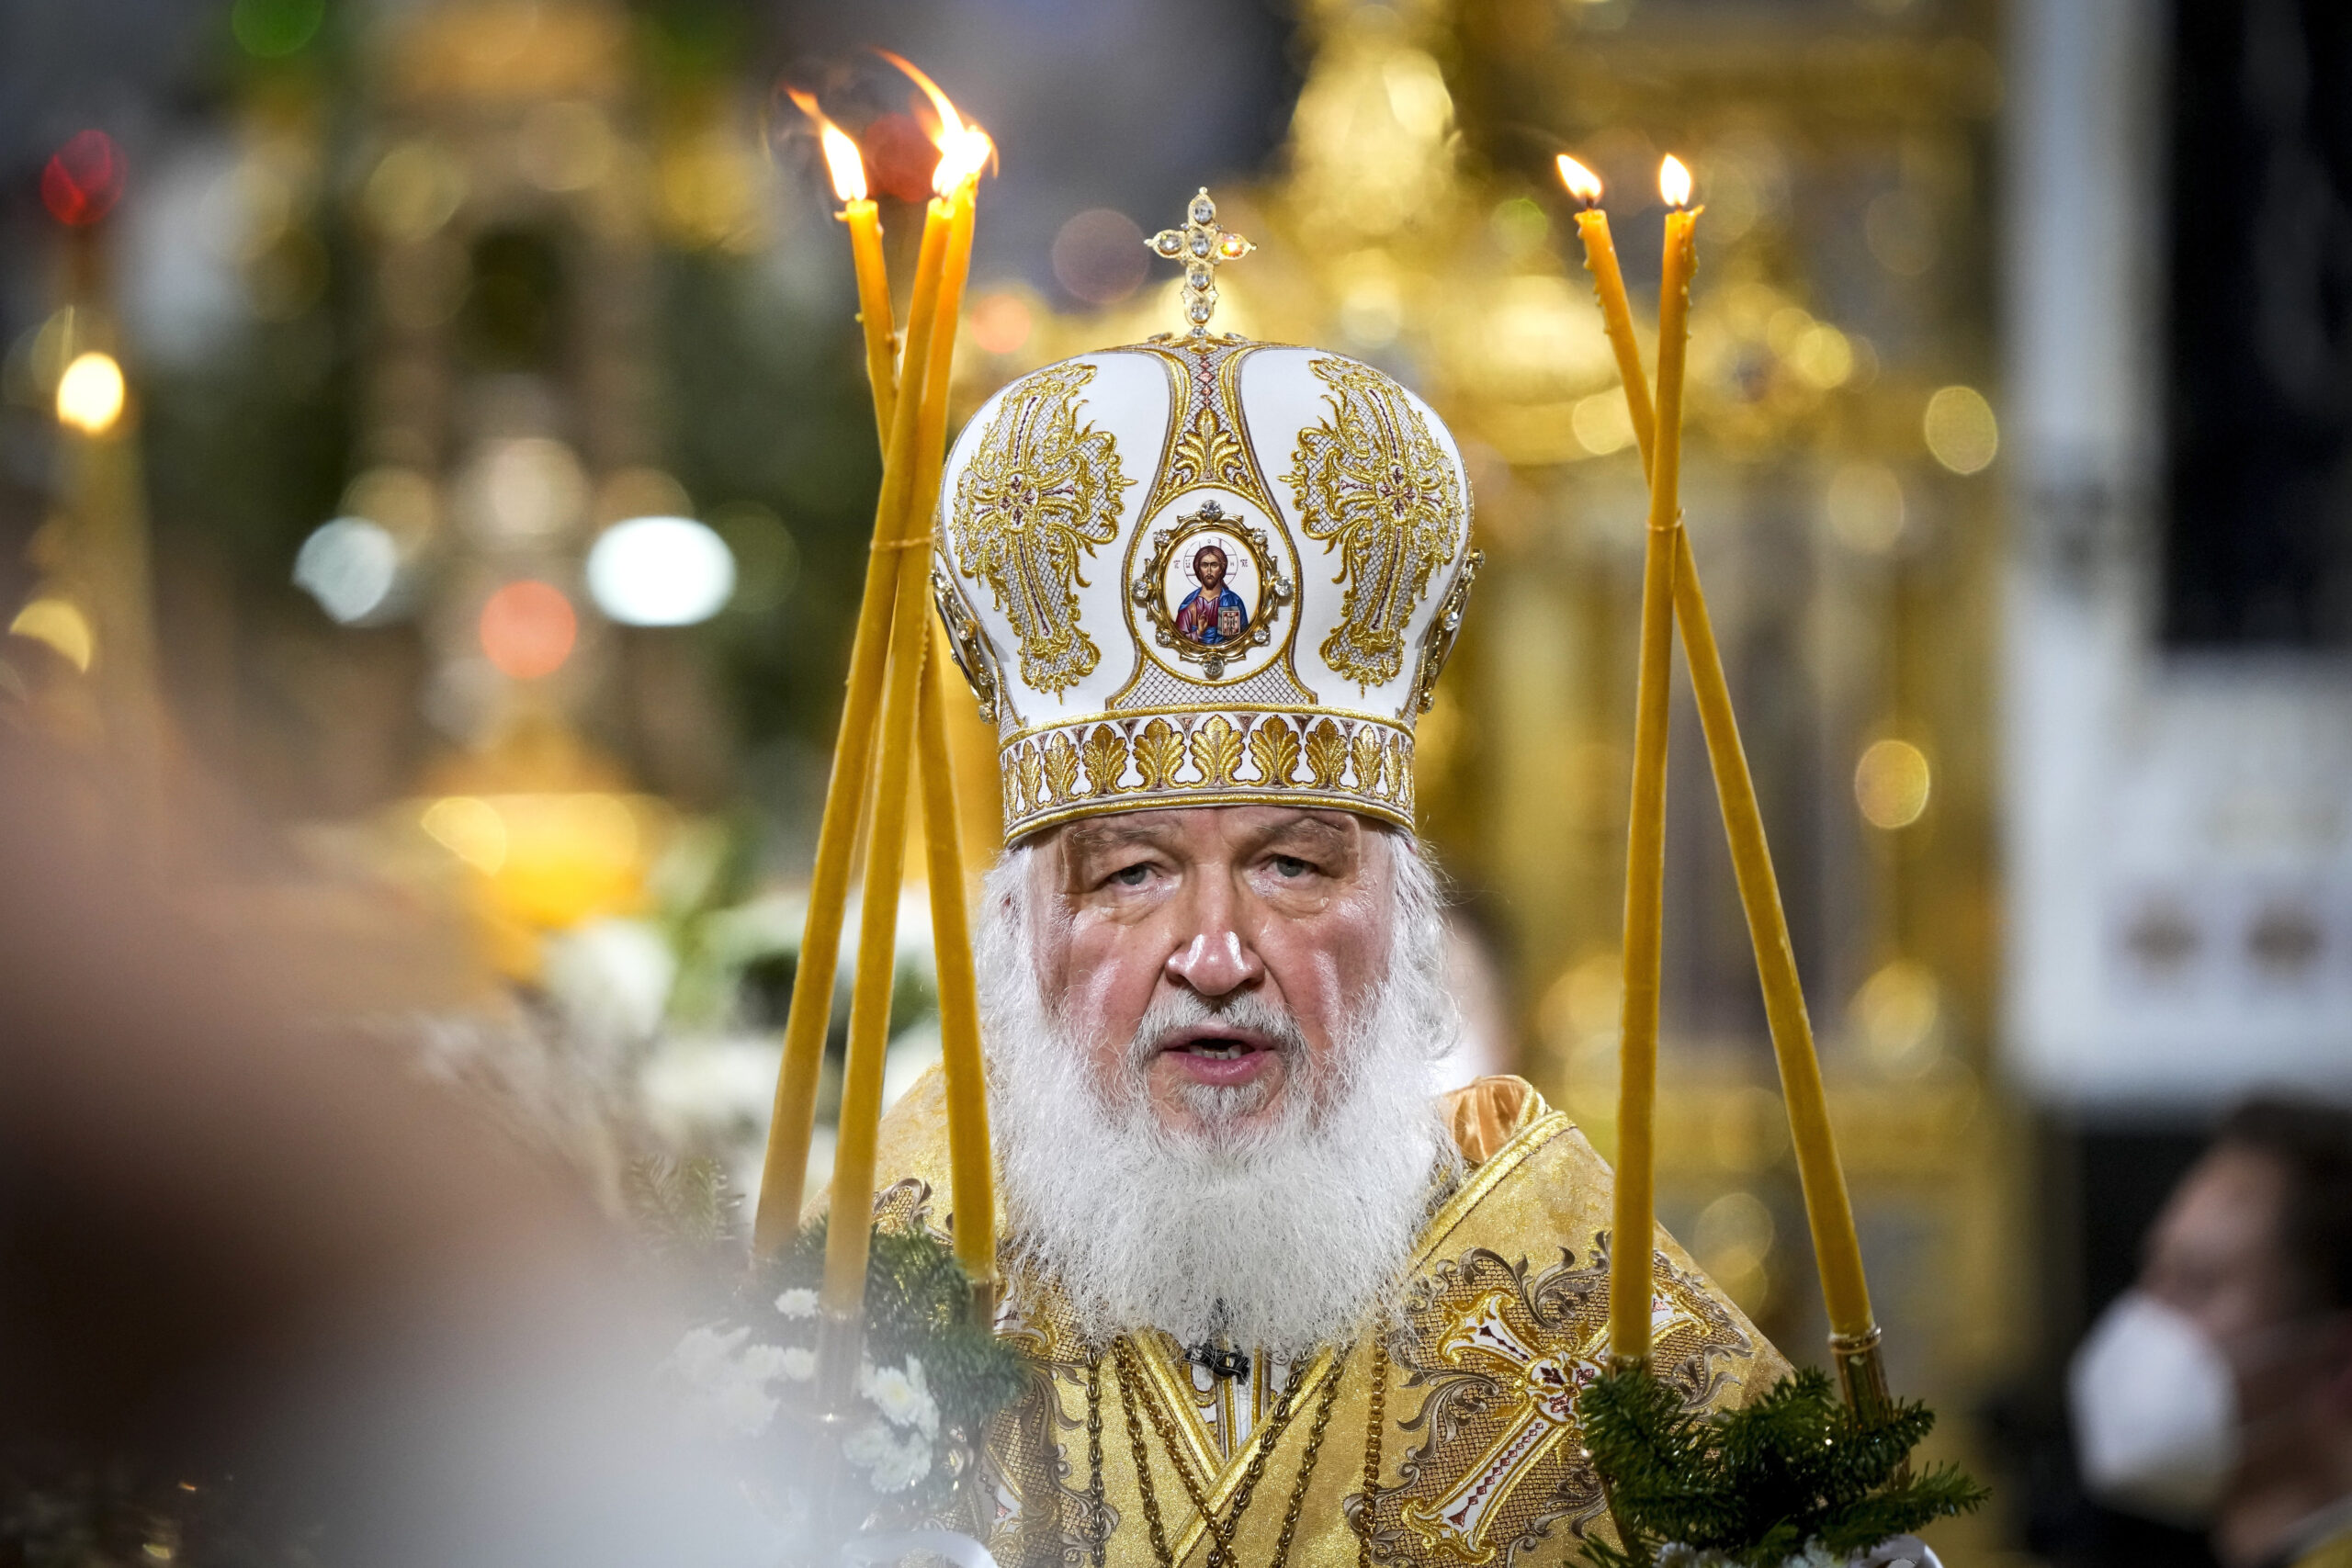 Russian Orthodox Patriarch Cyril at the Cathedral of Christ the Savior in Moscow, January 6, 2022. (AP Photo/Alexander Zemlianichenko)